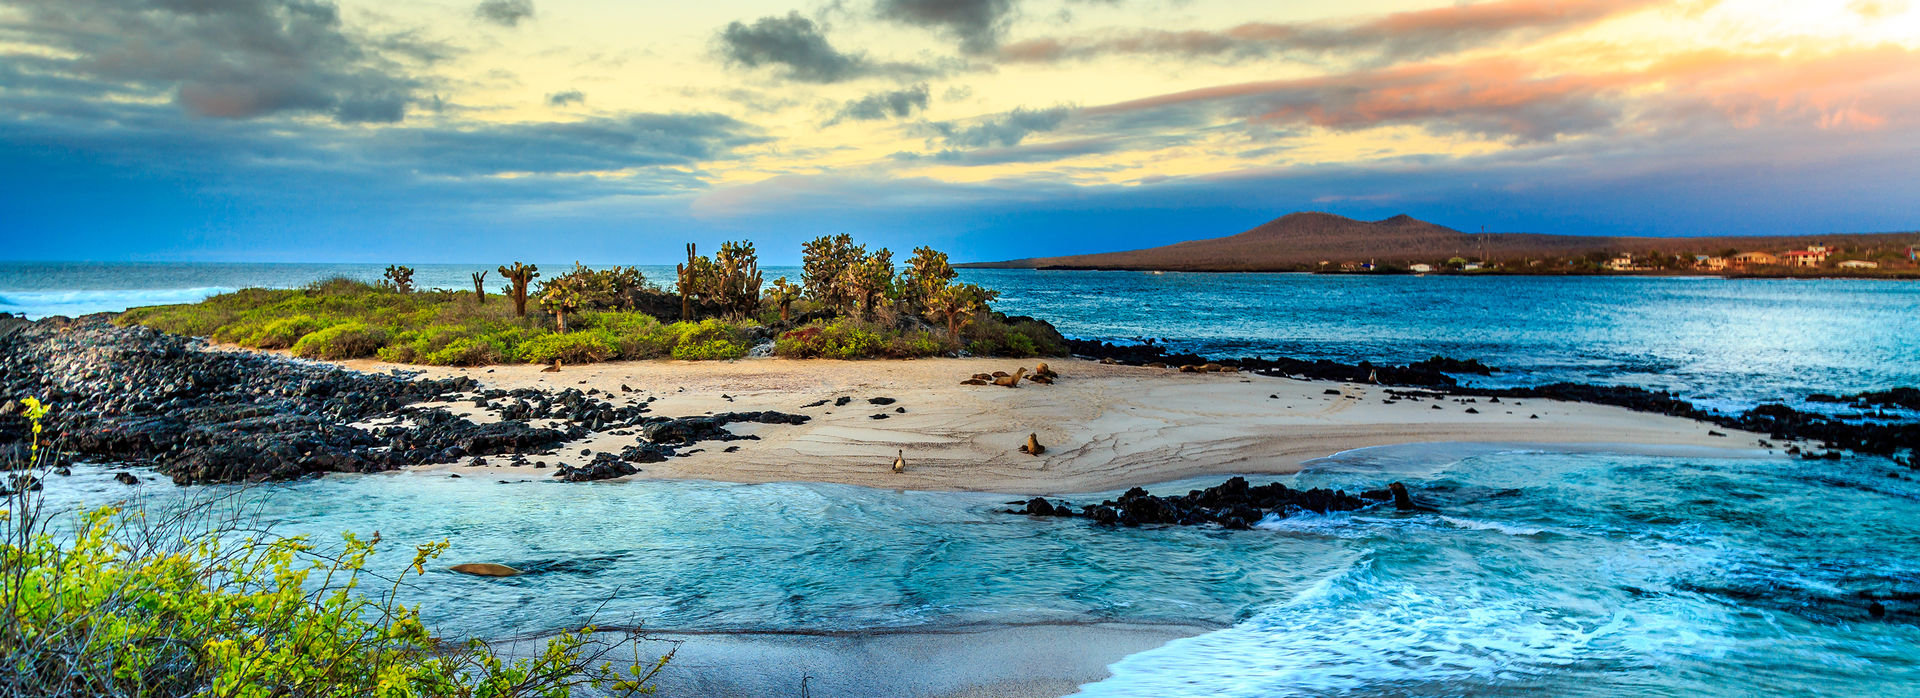 Dreaming of the Galapagos Islands?